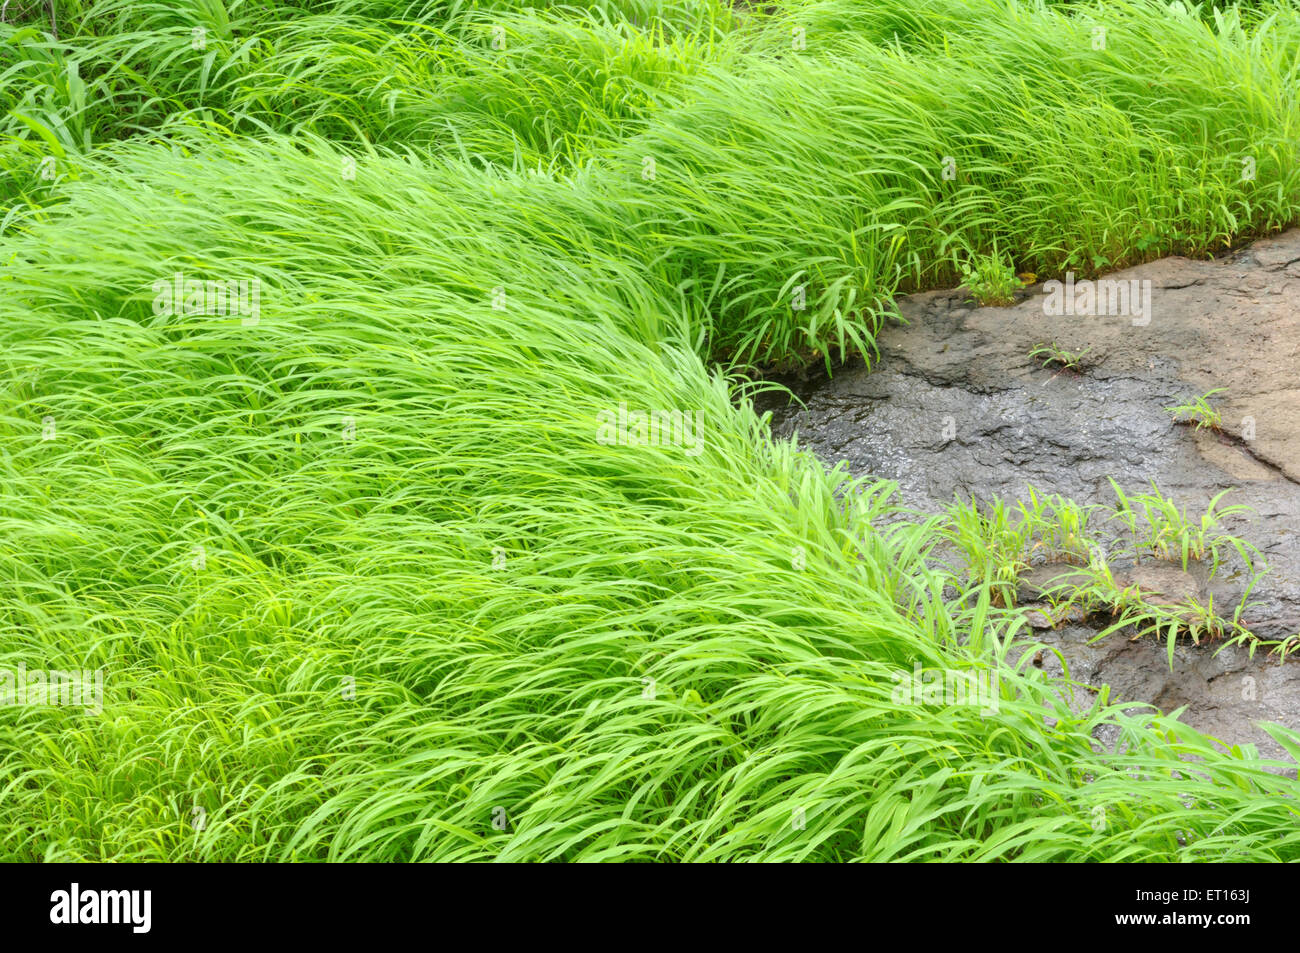 green grass swaying in the wind Stock Photo